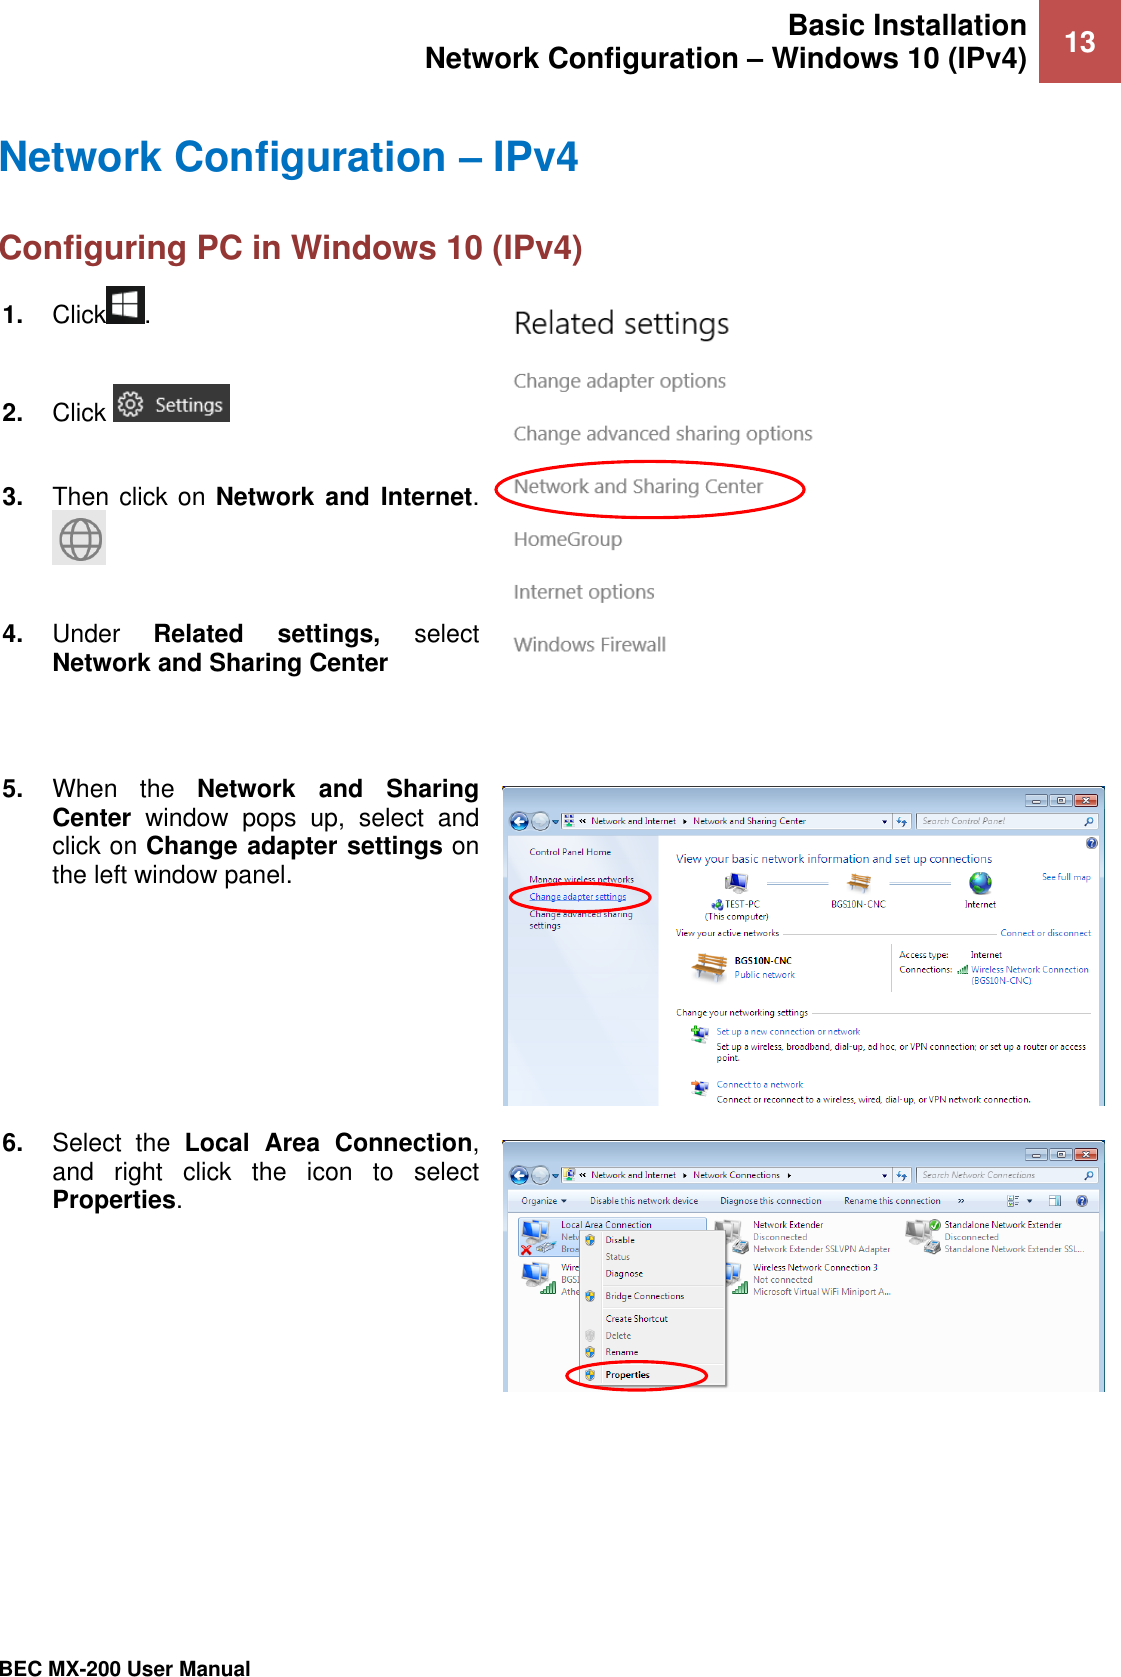 Basic Installation Network Configuration – Windows 10 (IPv4) 13   BEC MX-200 User Manual  Network Configuration – IPv4 Configuring PC in Windows 10 (IPv4)    1. Click .  2. Click    3. Then click on Network and  Internet.   4. Under  Related  settings,  select Network and Sharing Center    5. When  the  Network  and  Sharing Center  window  pops  up,  select  and click on Change adapter settings on the left window panel.  6. Select  the  Local  Area  Connection, and  right  click  the  icon  to  select Properties.  